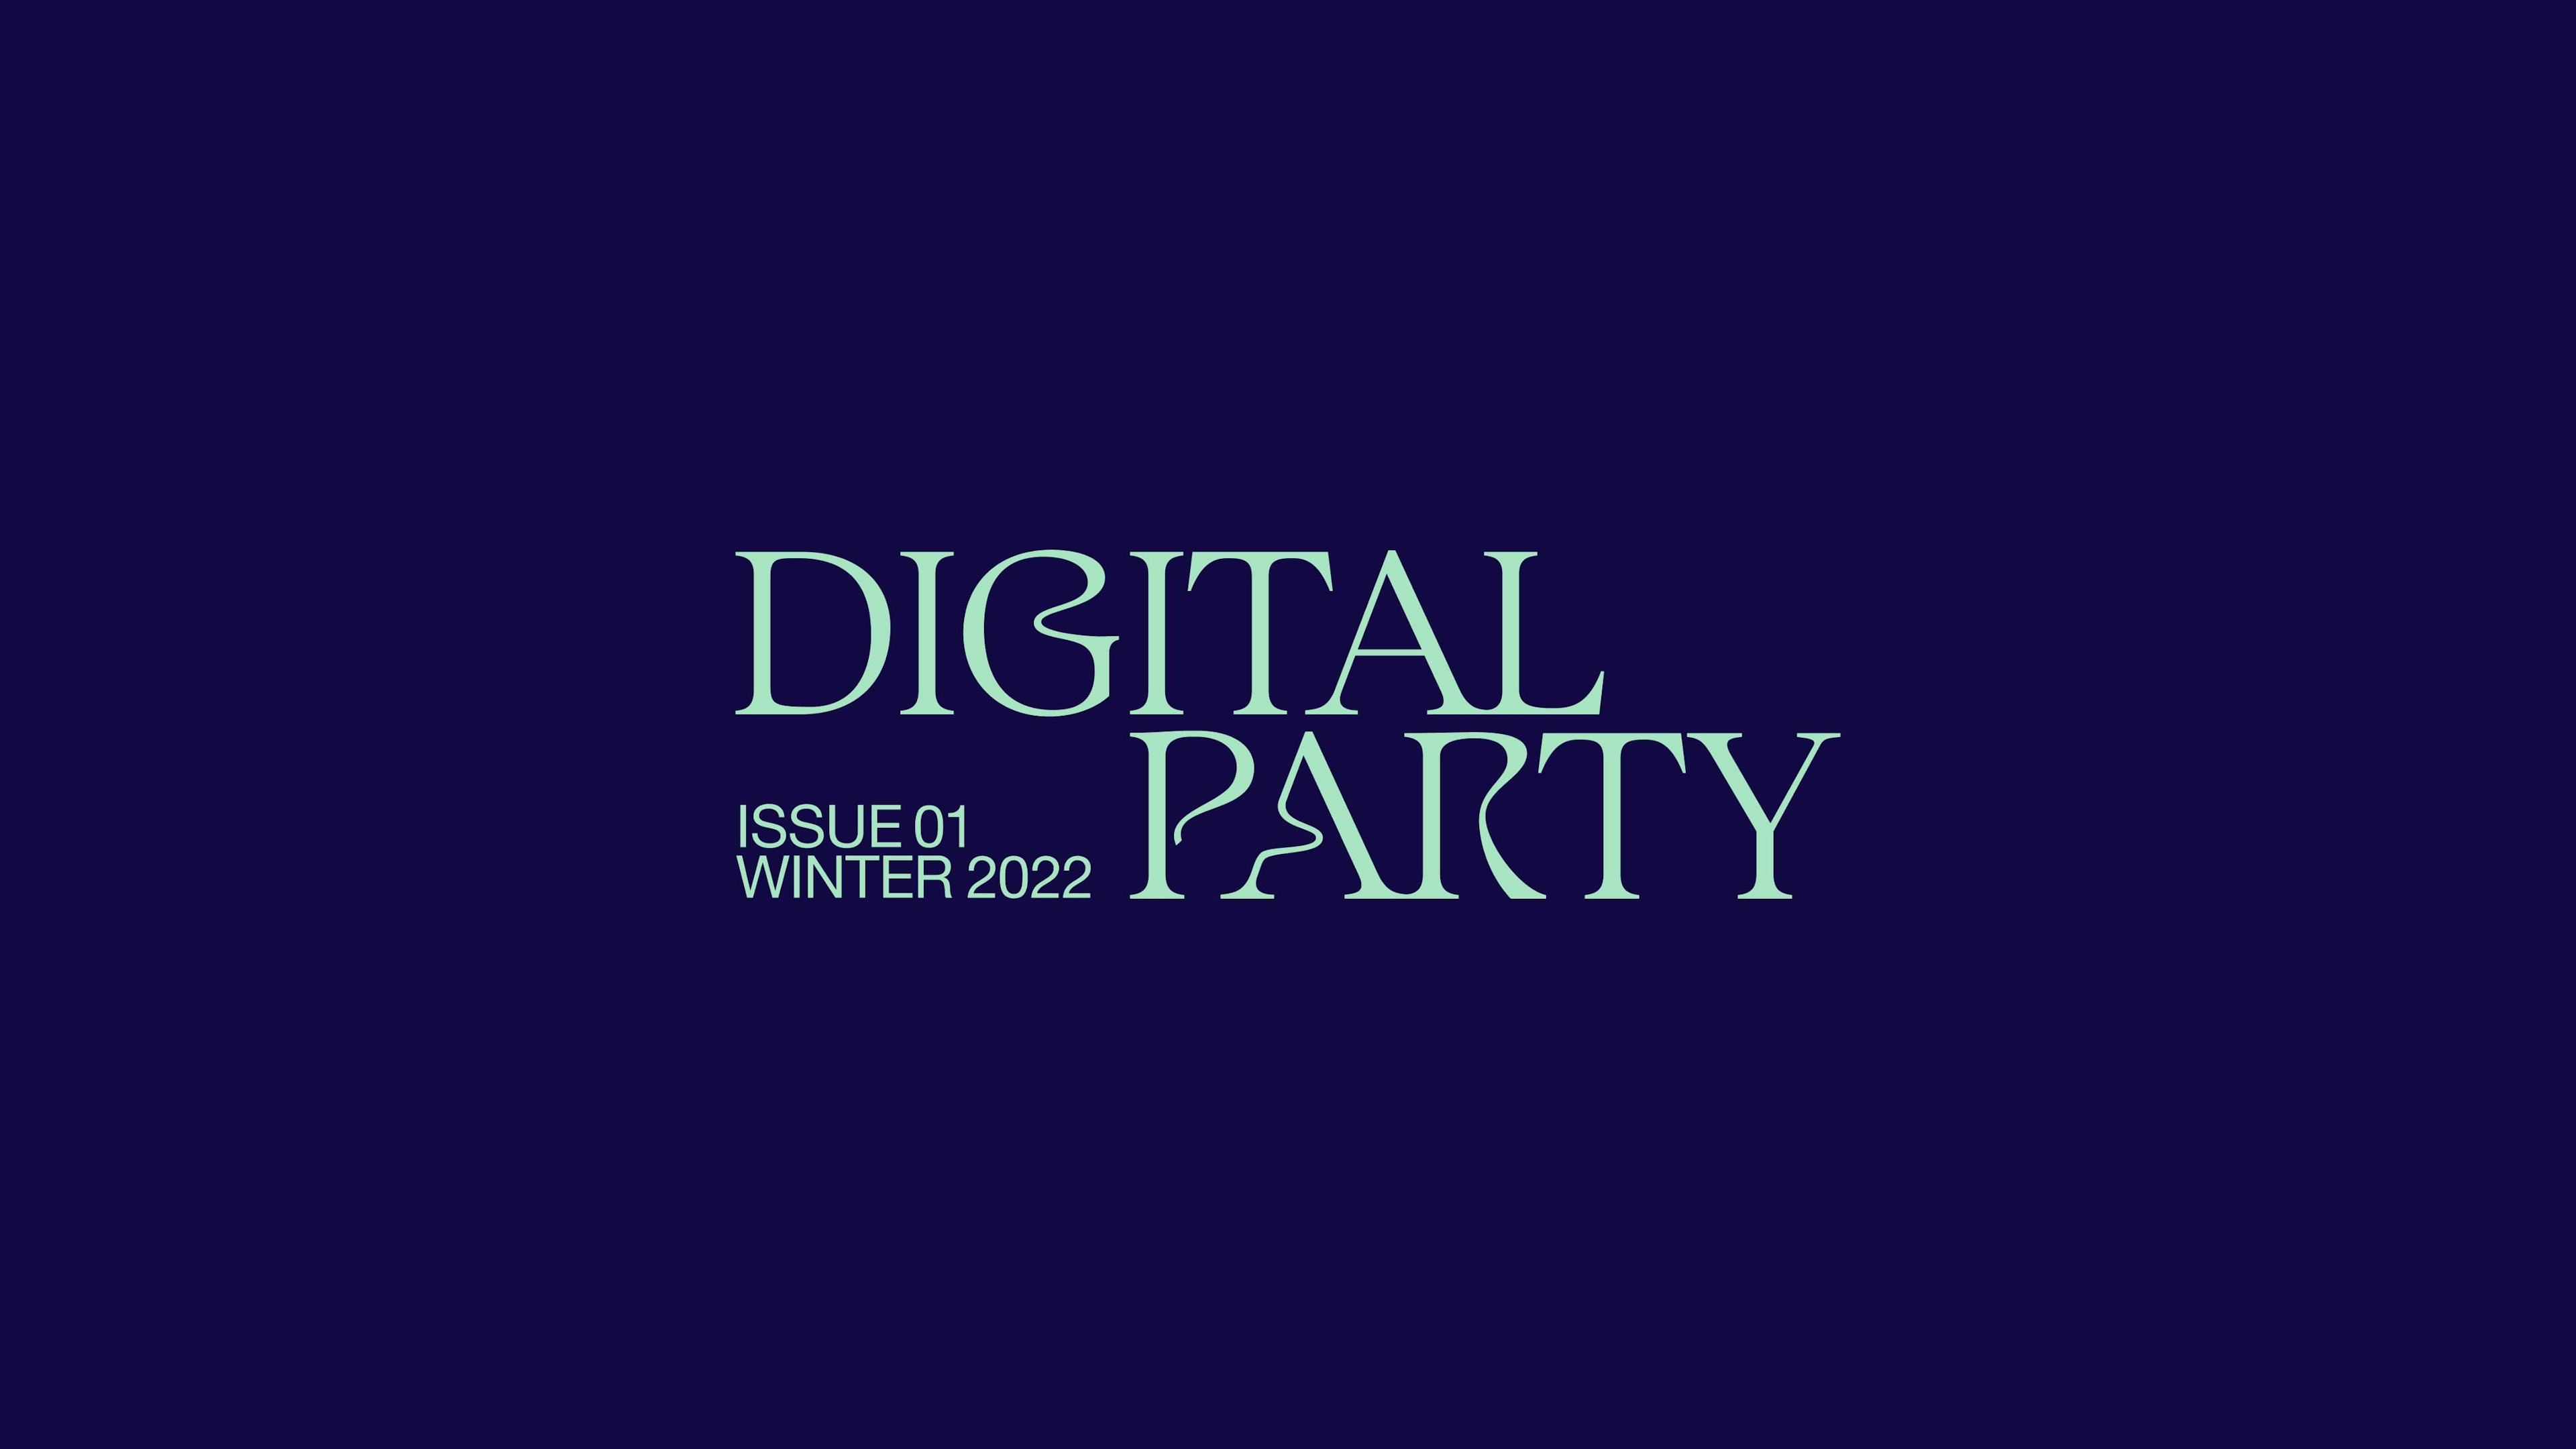 The Digital Party Brand Identity Design by View Source